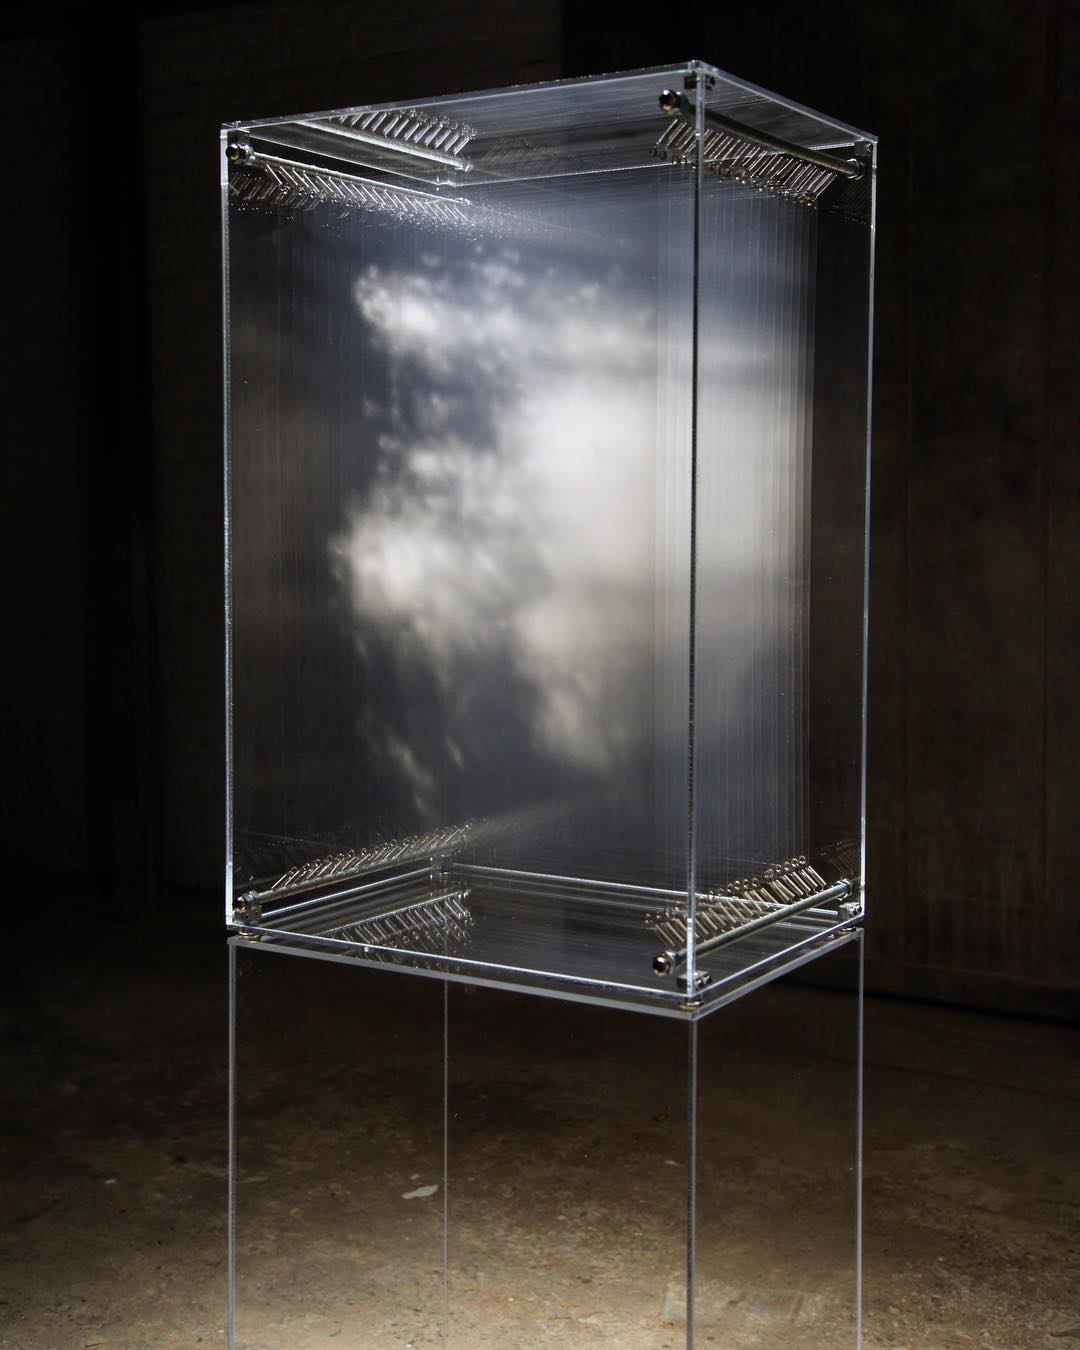 Data by David Spriggs – Painted layered transparent sheets